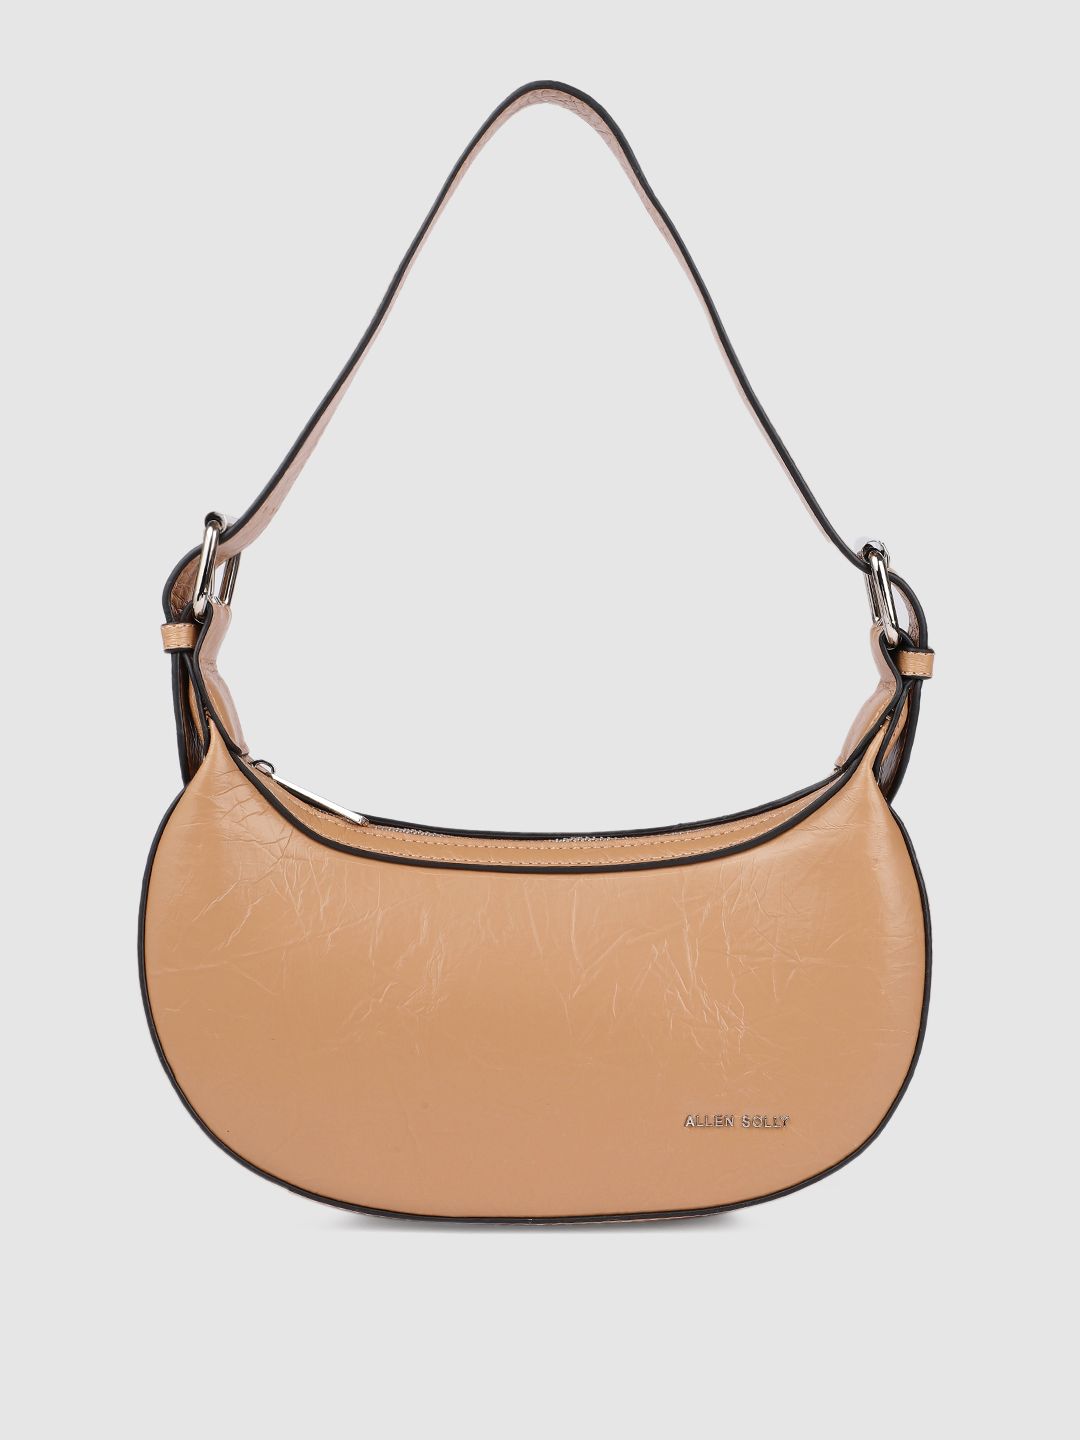 Allen Solly Tan Brown Textured Structured Shoulder Bag Price in India